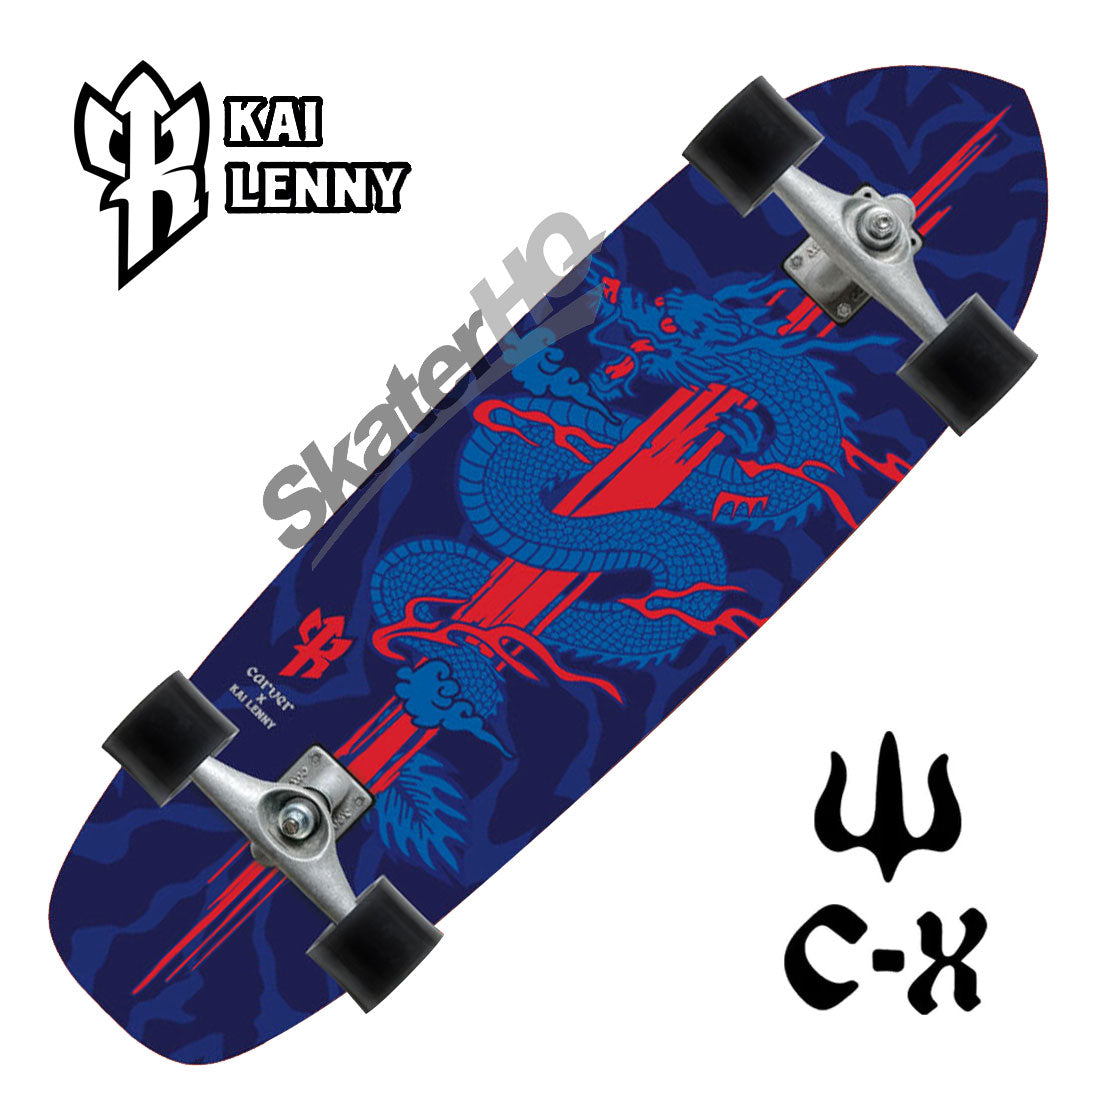 Carver x Kai Lenny Dragon 34 CX Raw Complete Skateboard Compl Carving and Specialty